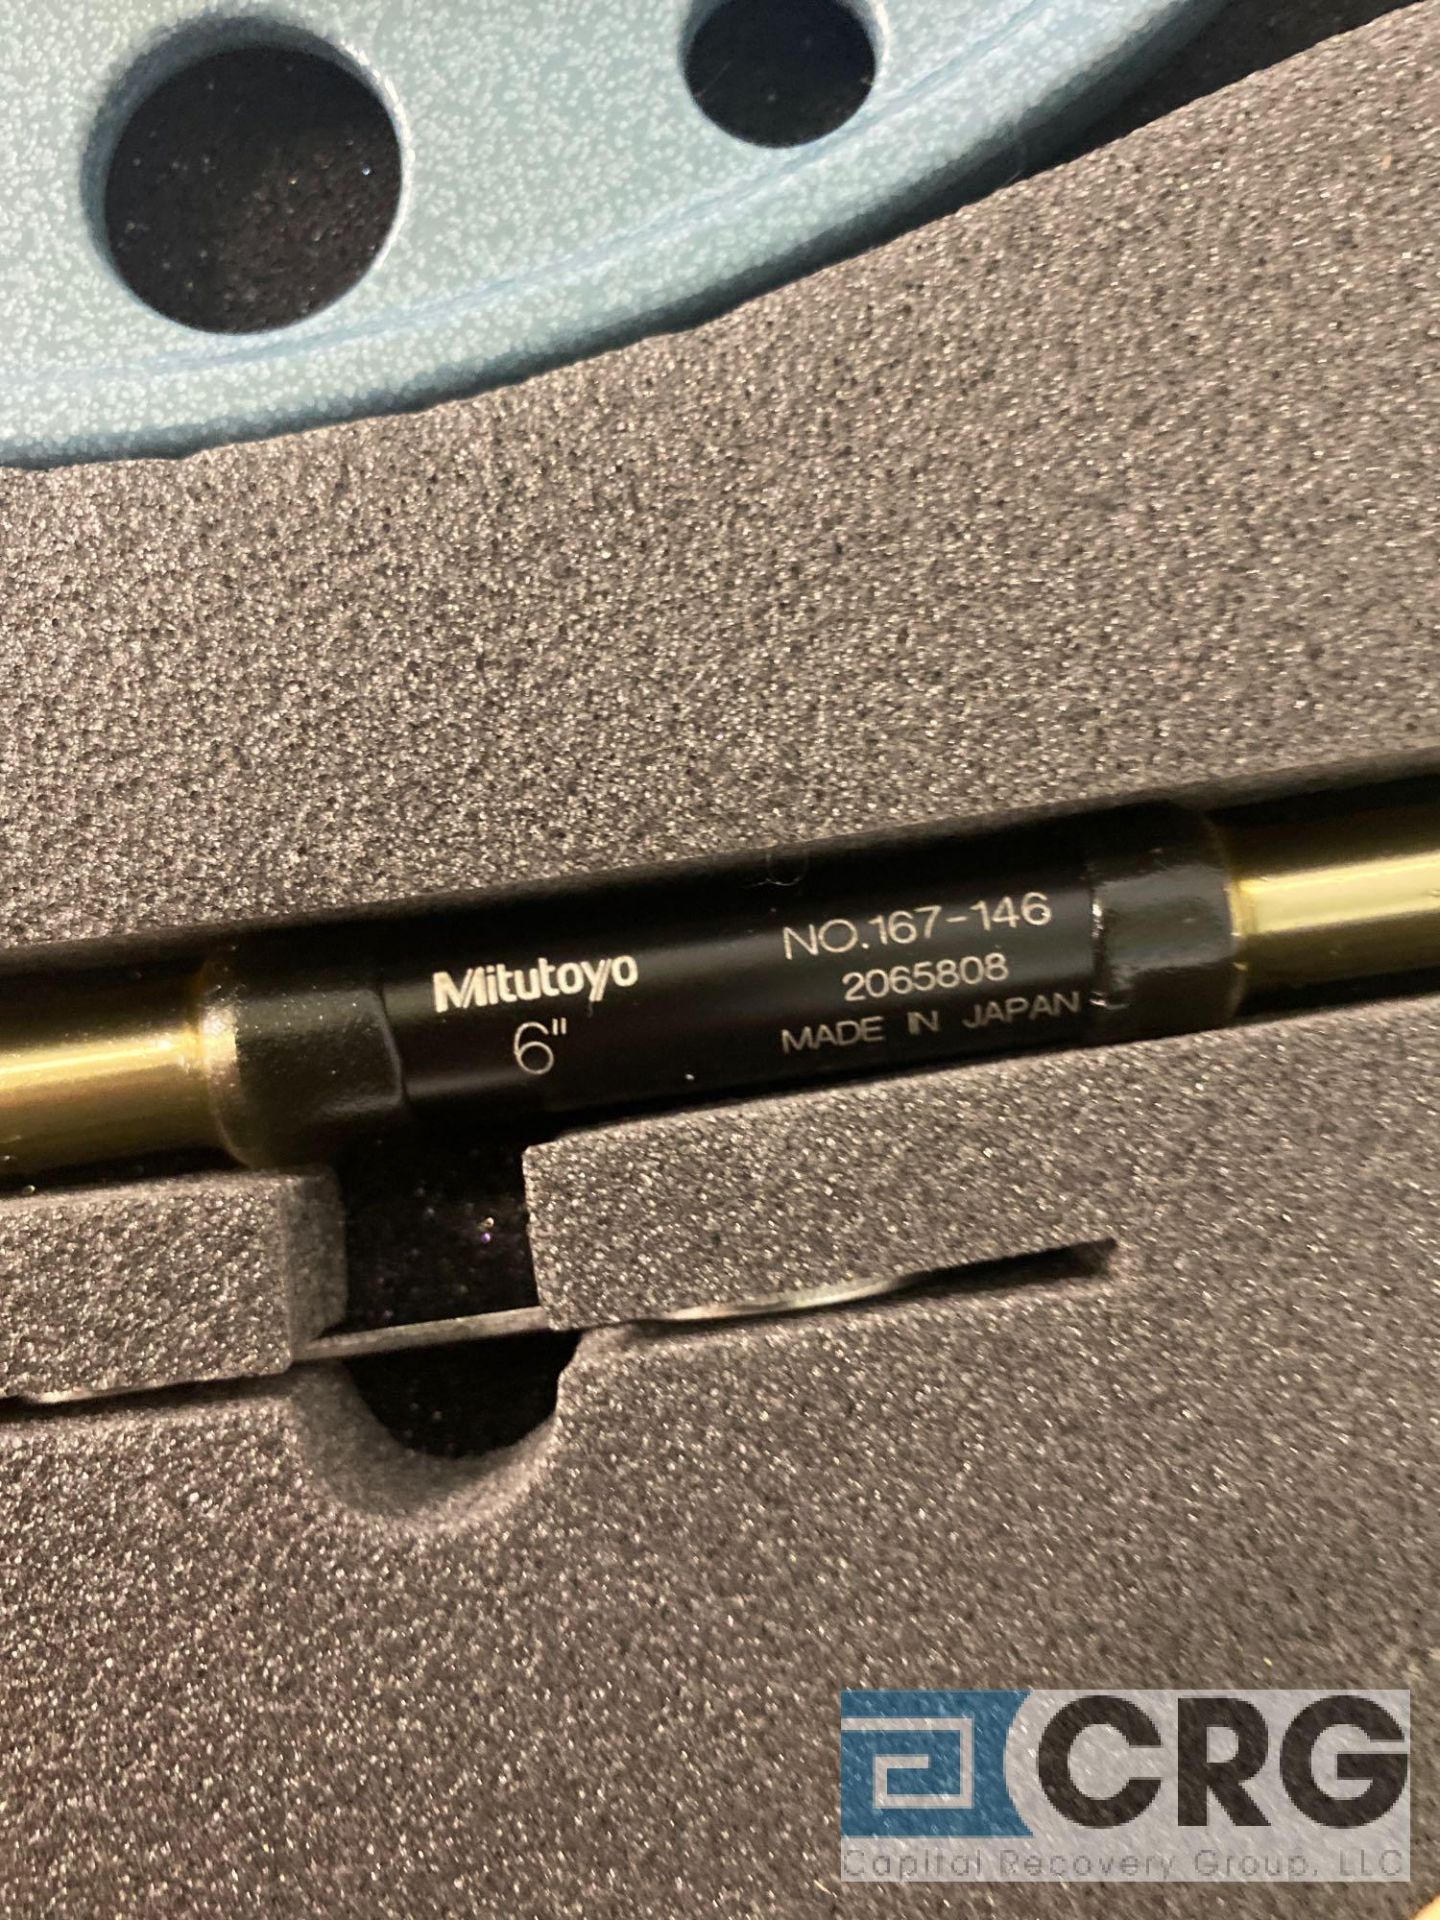 Mitutoyo 6-7 inch outside micrometer, MN 103-221, with case - Image 3 of 5